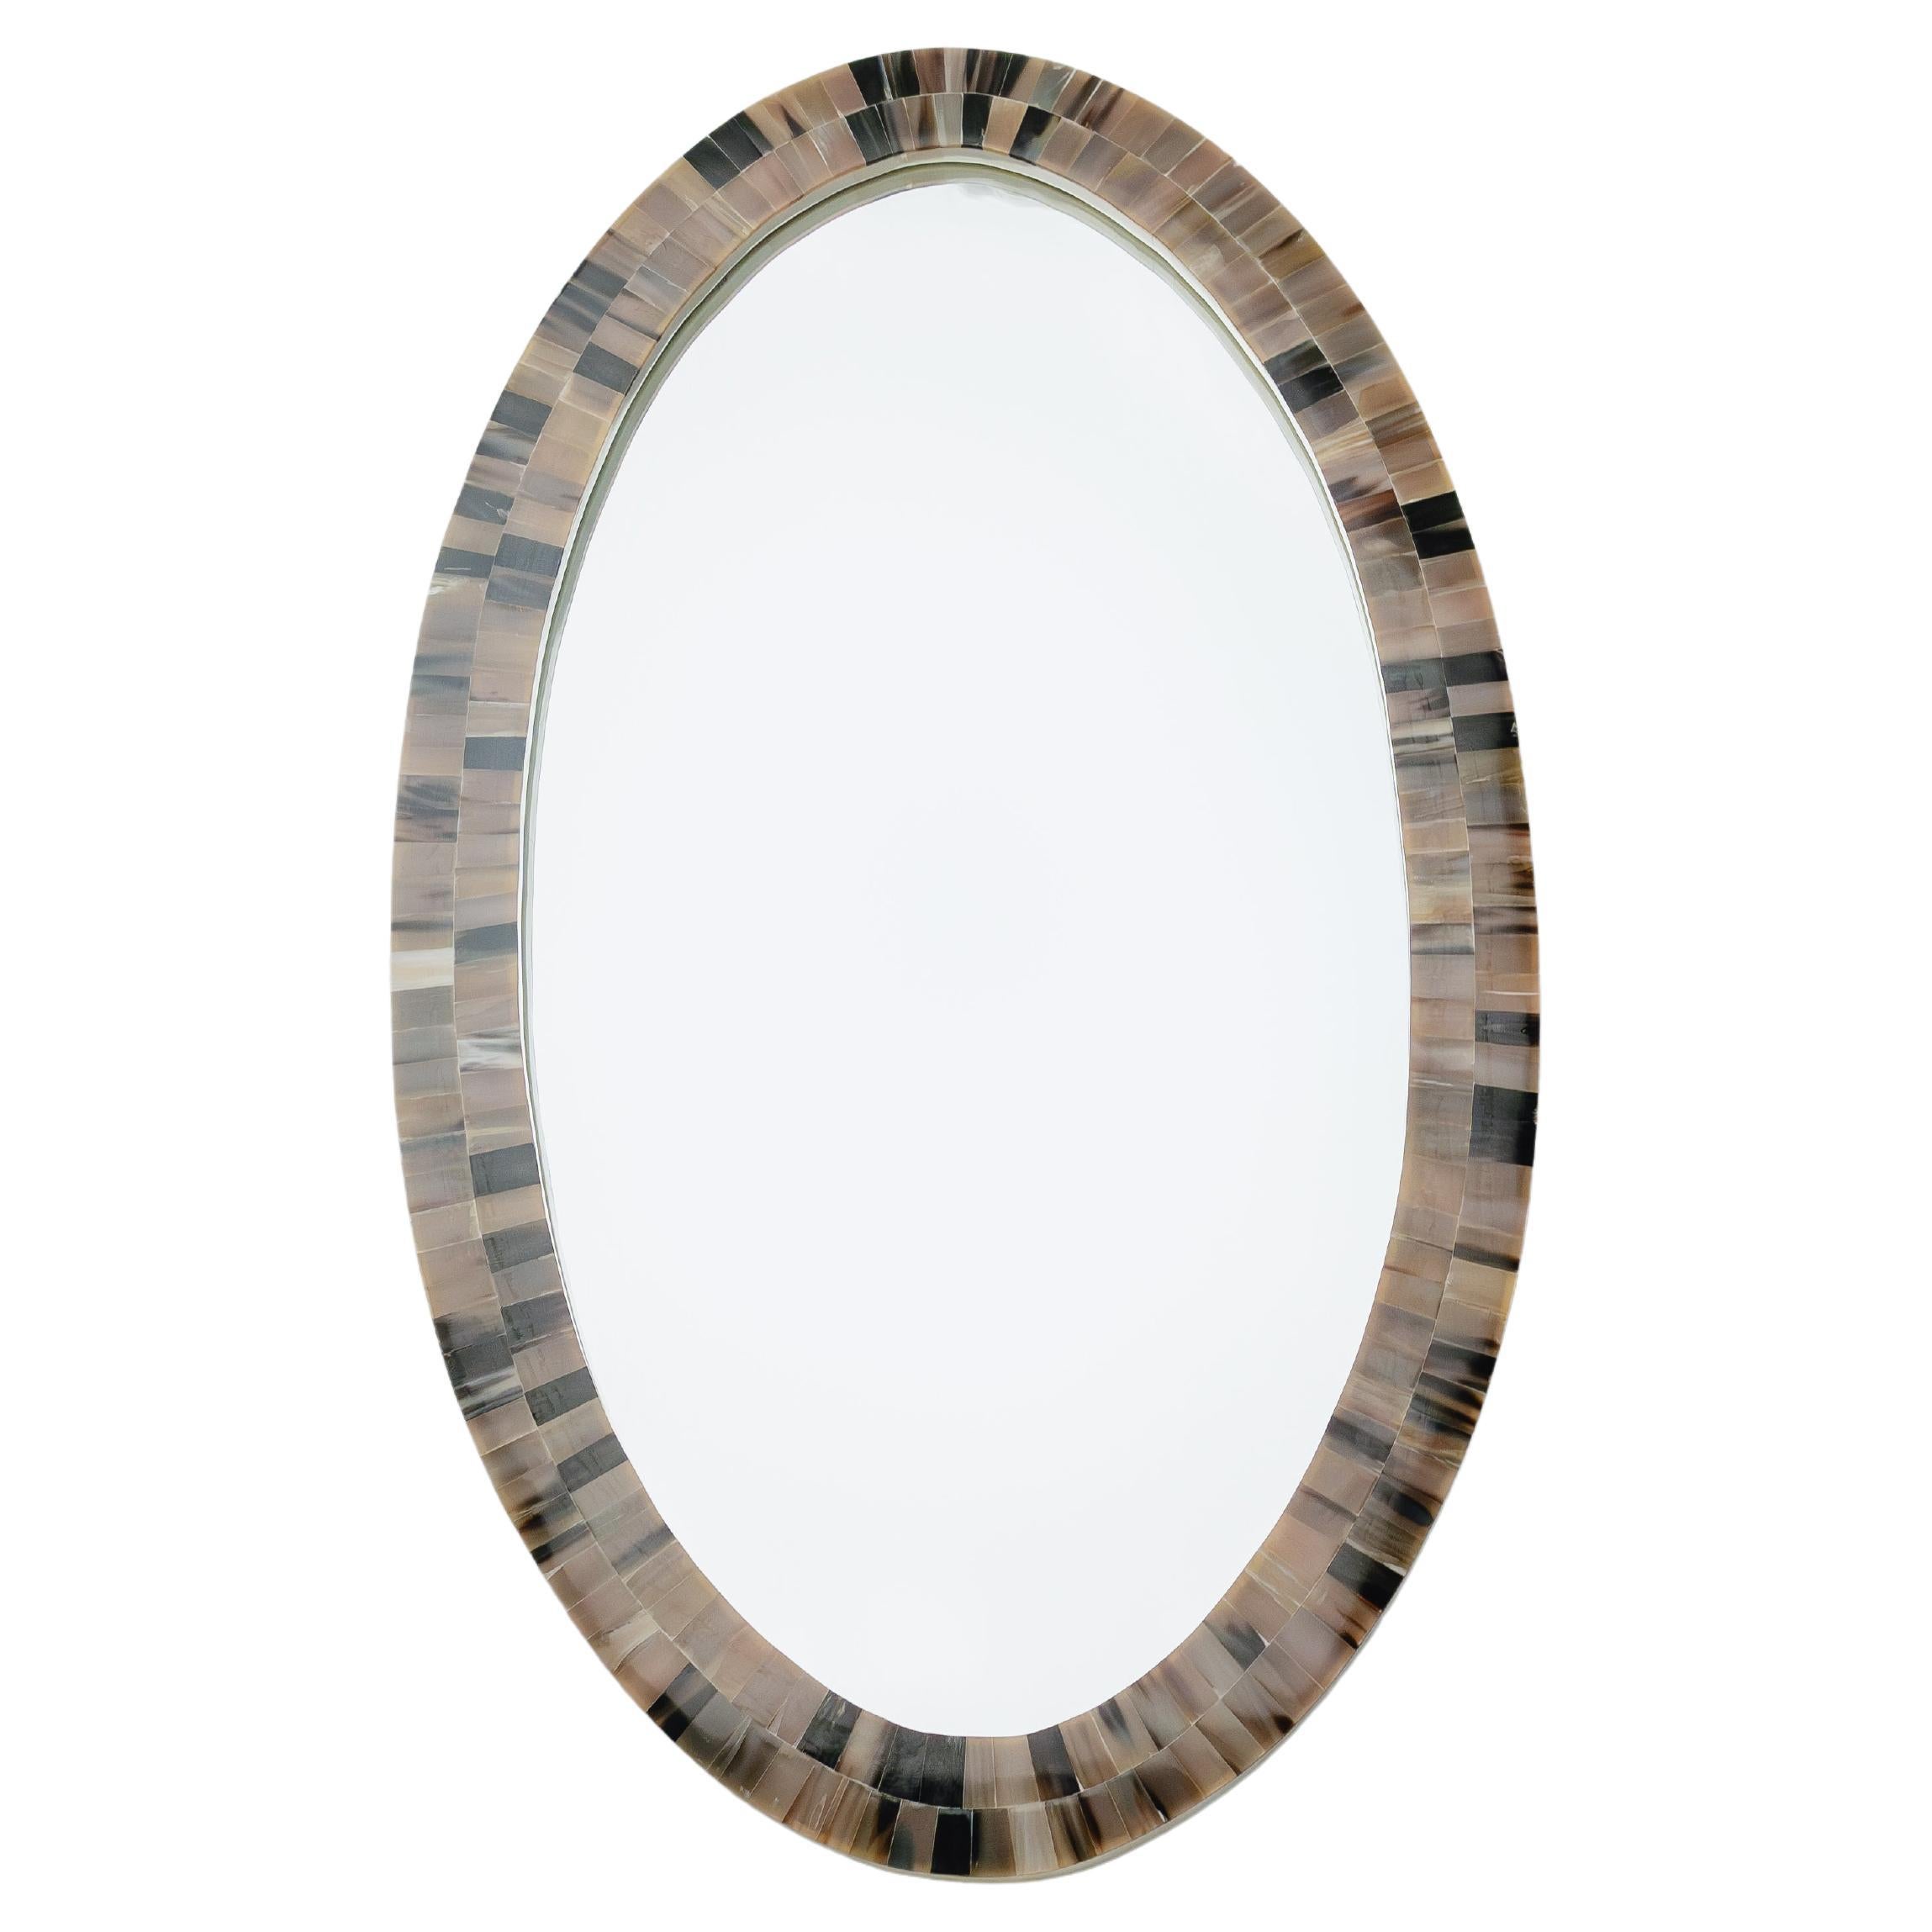 Introducing the Orbit, Oval Horn Mirror, a testament to the visionary craftsmanship at Farrago Design. With a perfect oval shape, it grants a versatility to compliment any space, from grand hallways to intimate chambers, with an air of timeless